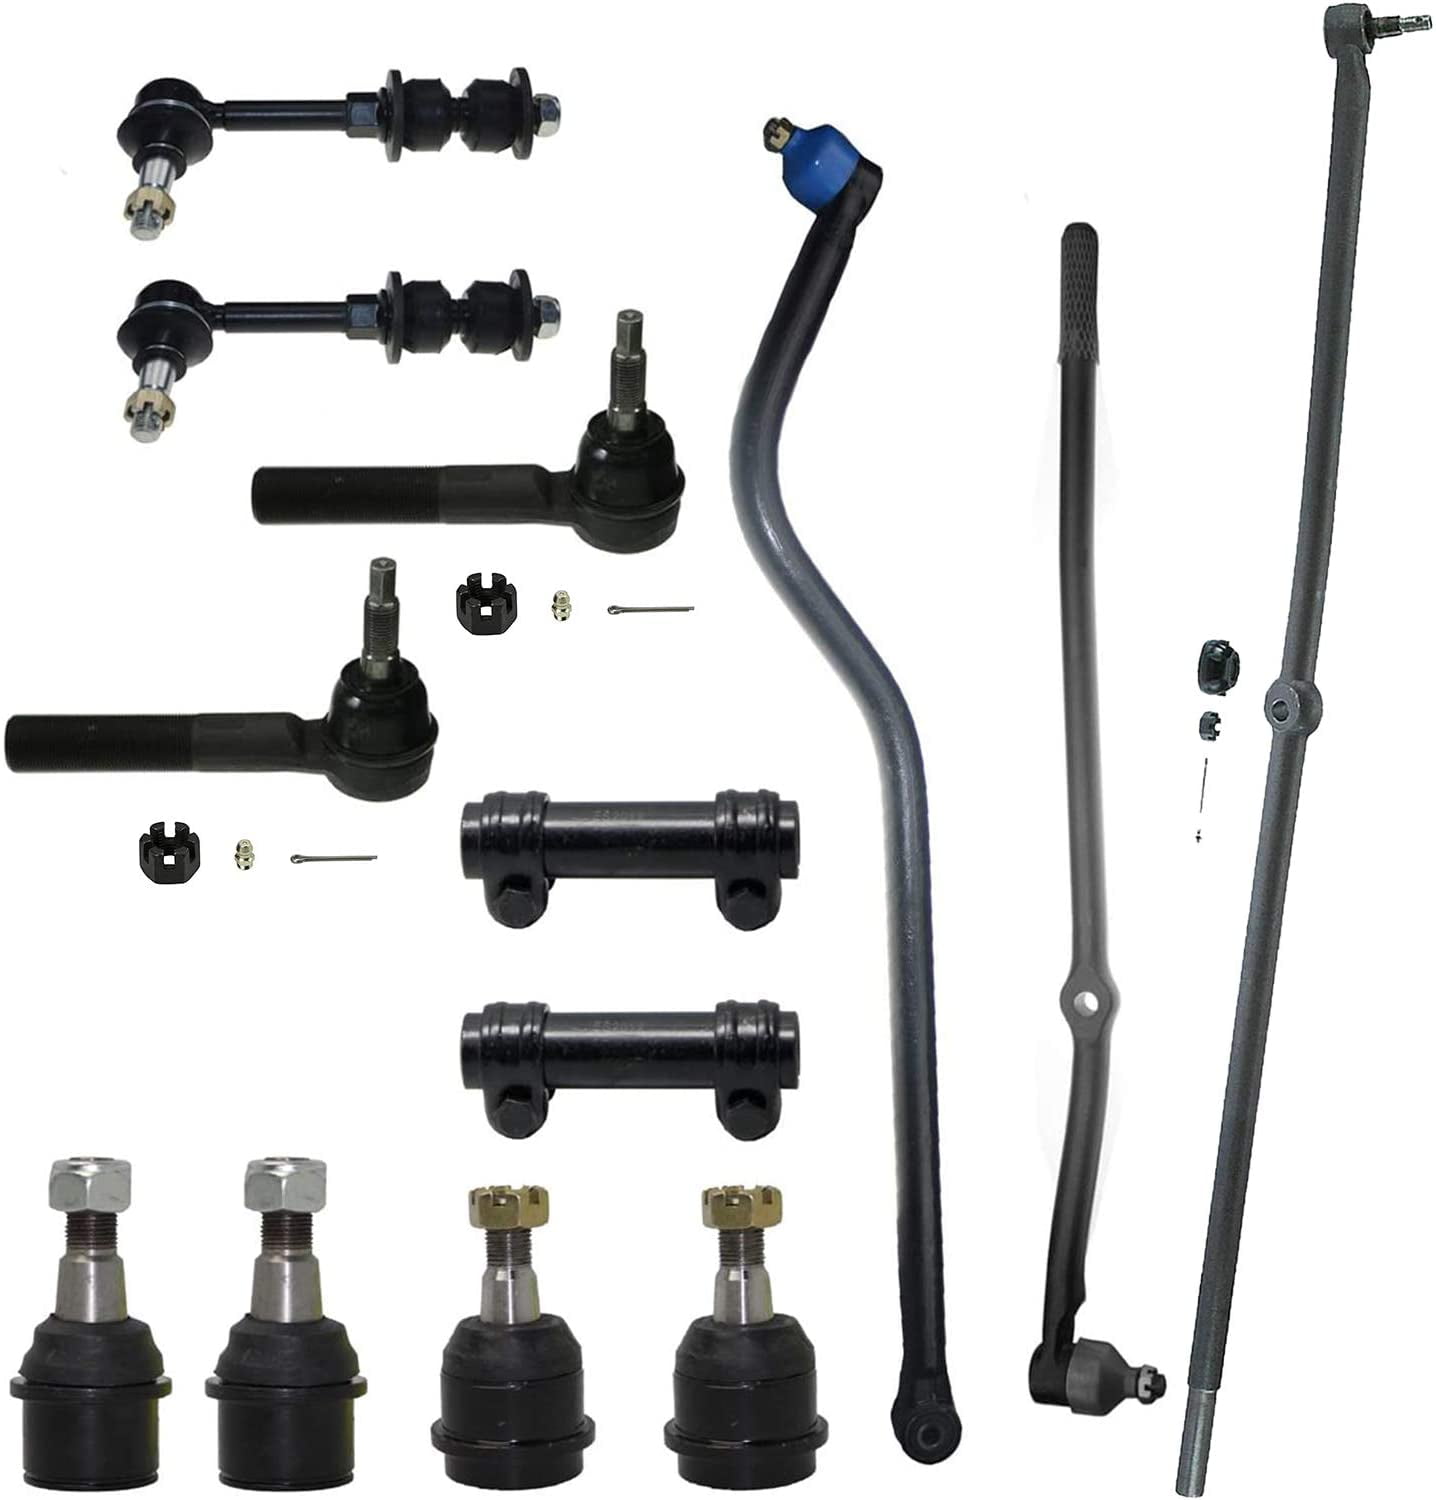 Front Upper & Lower Ball Joints Inner Outer Tie Rod Drag Link Adjustment Sleeves & Sway Bars 13pc Kit Left & Right Side for 2000-2002 Dodge Ram 3500 4WD 2000-2002 Ram 2500 DANA 60 4x4 